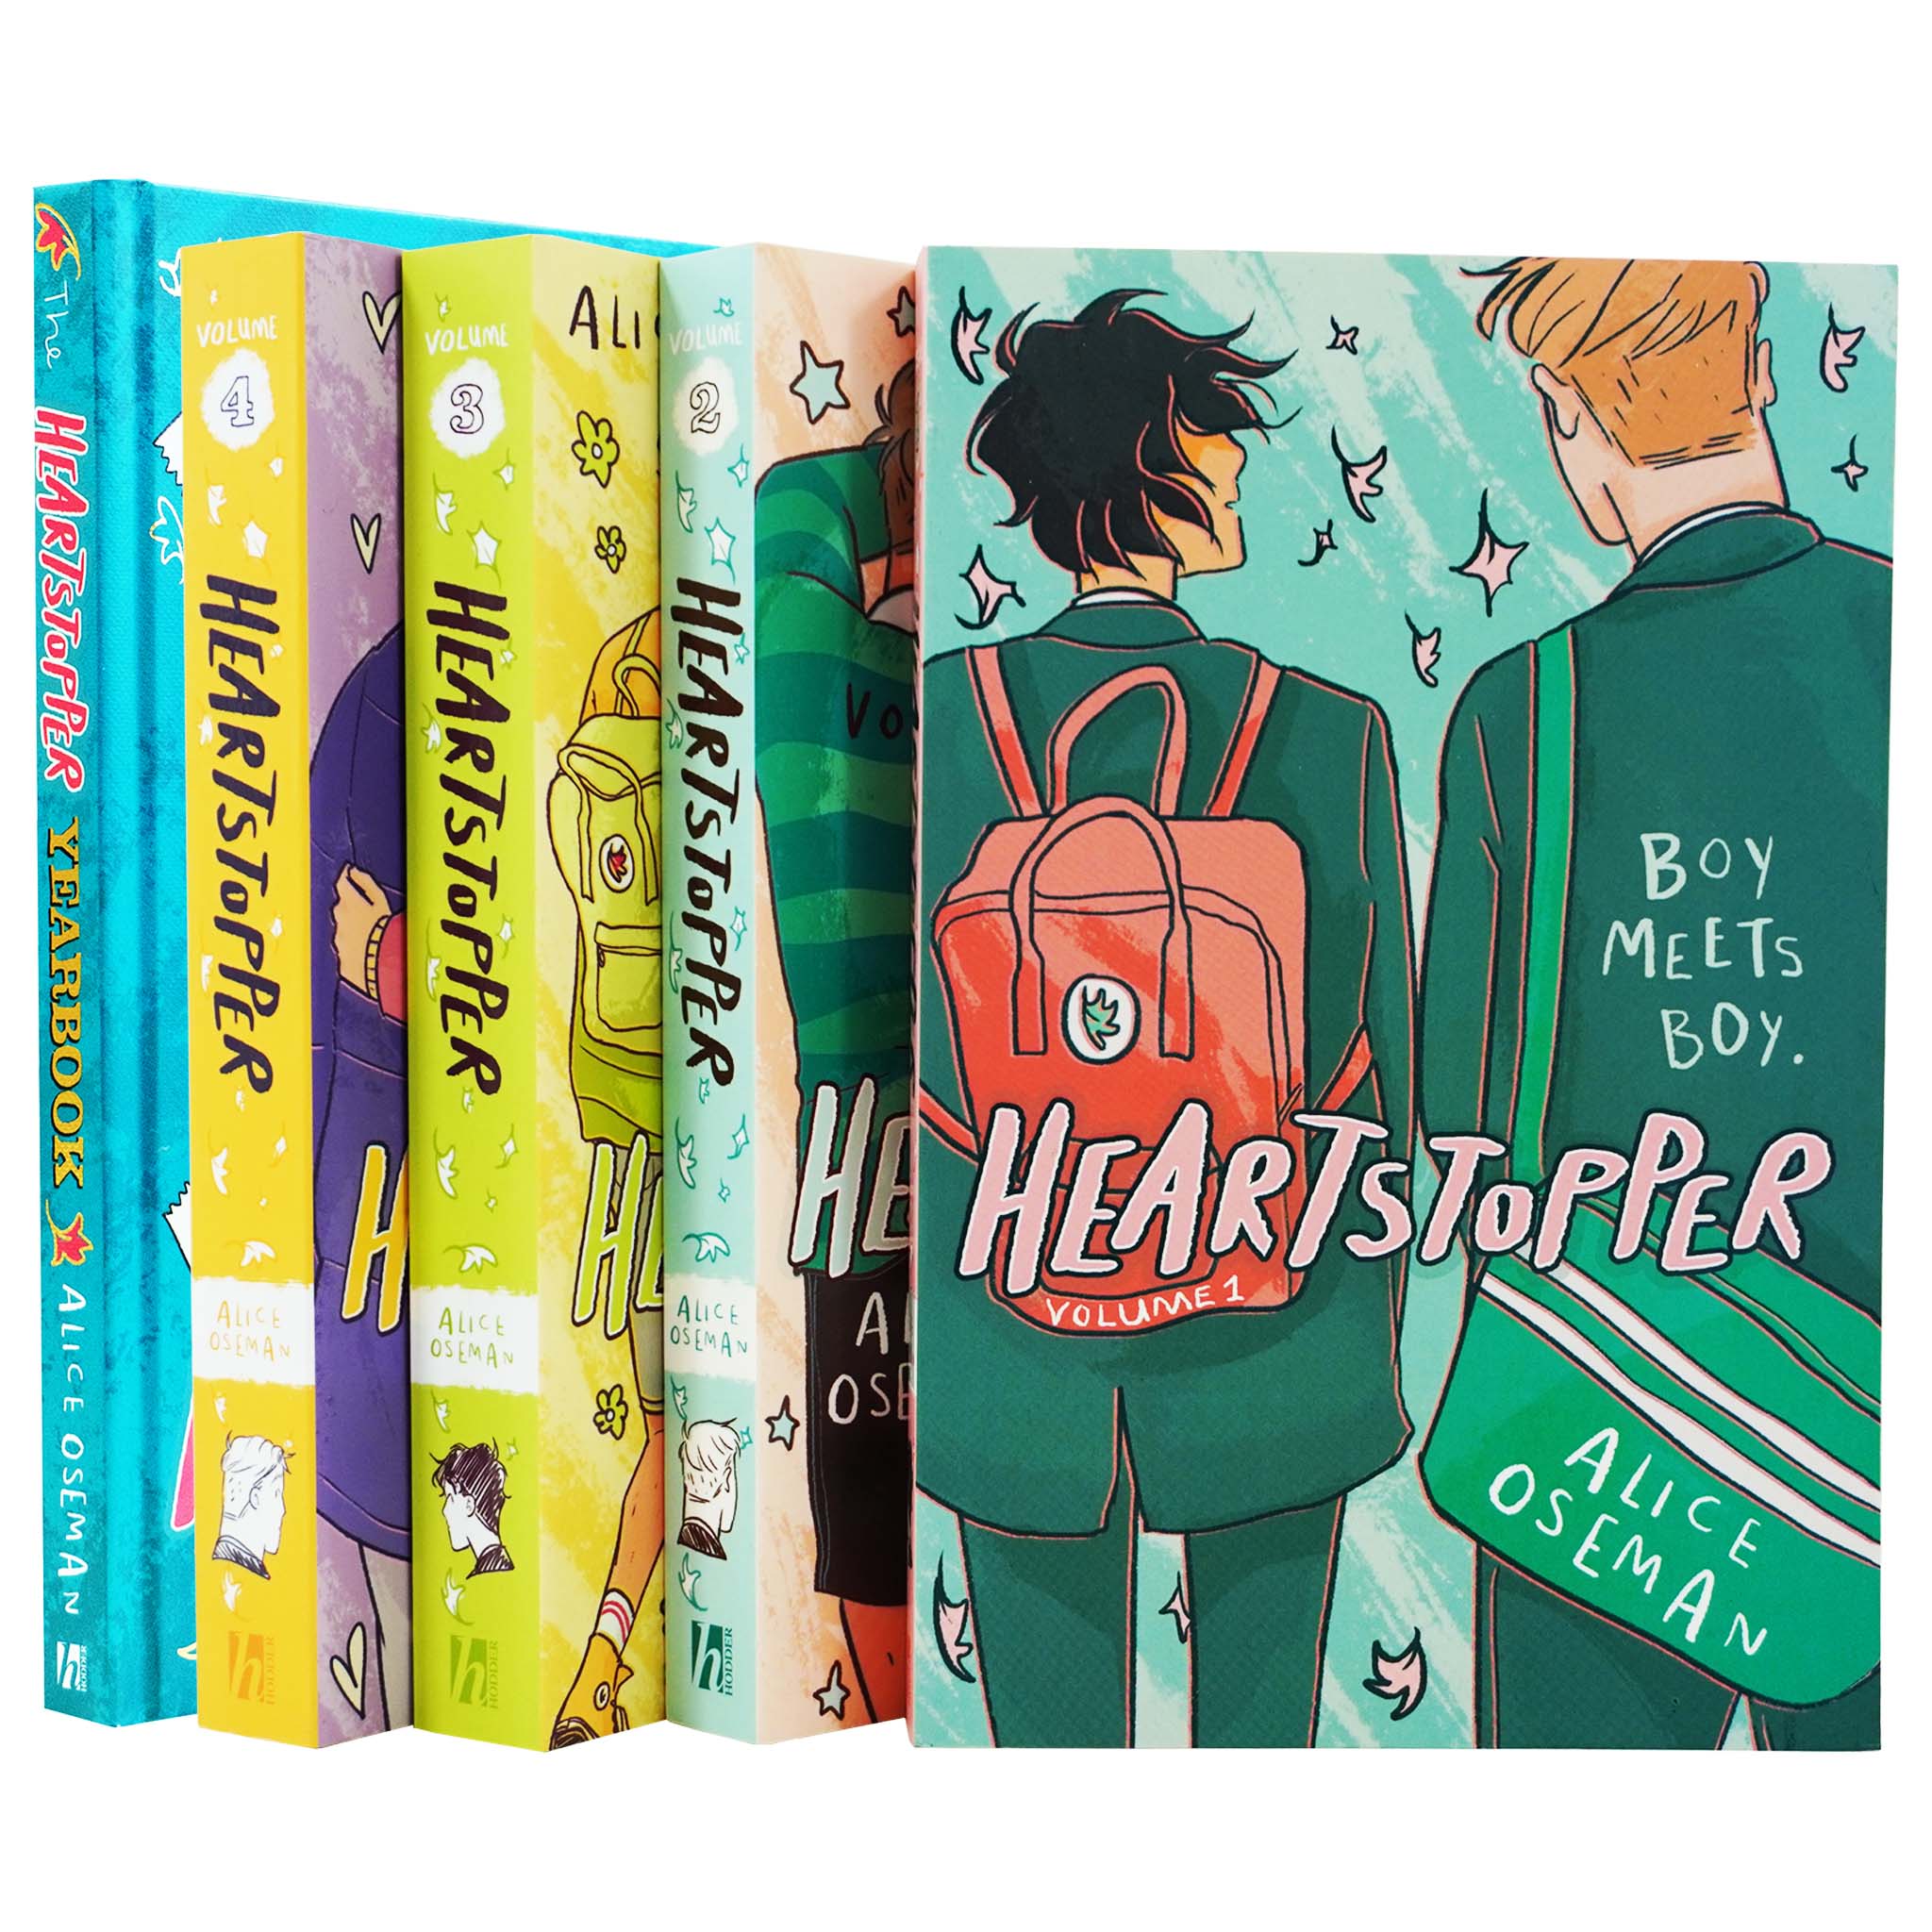 The Heartstopper Series & Heartstopper Yearbook by Alice Oseman 5 Books  Collection Set - Ages 12+ - Paperback/Hardback